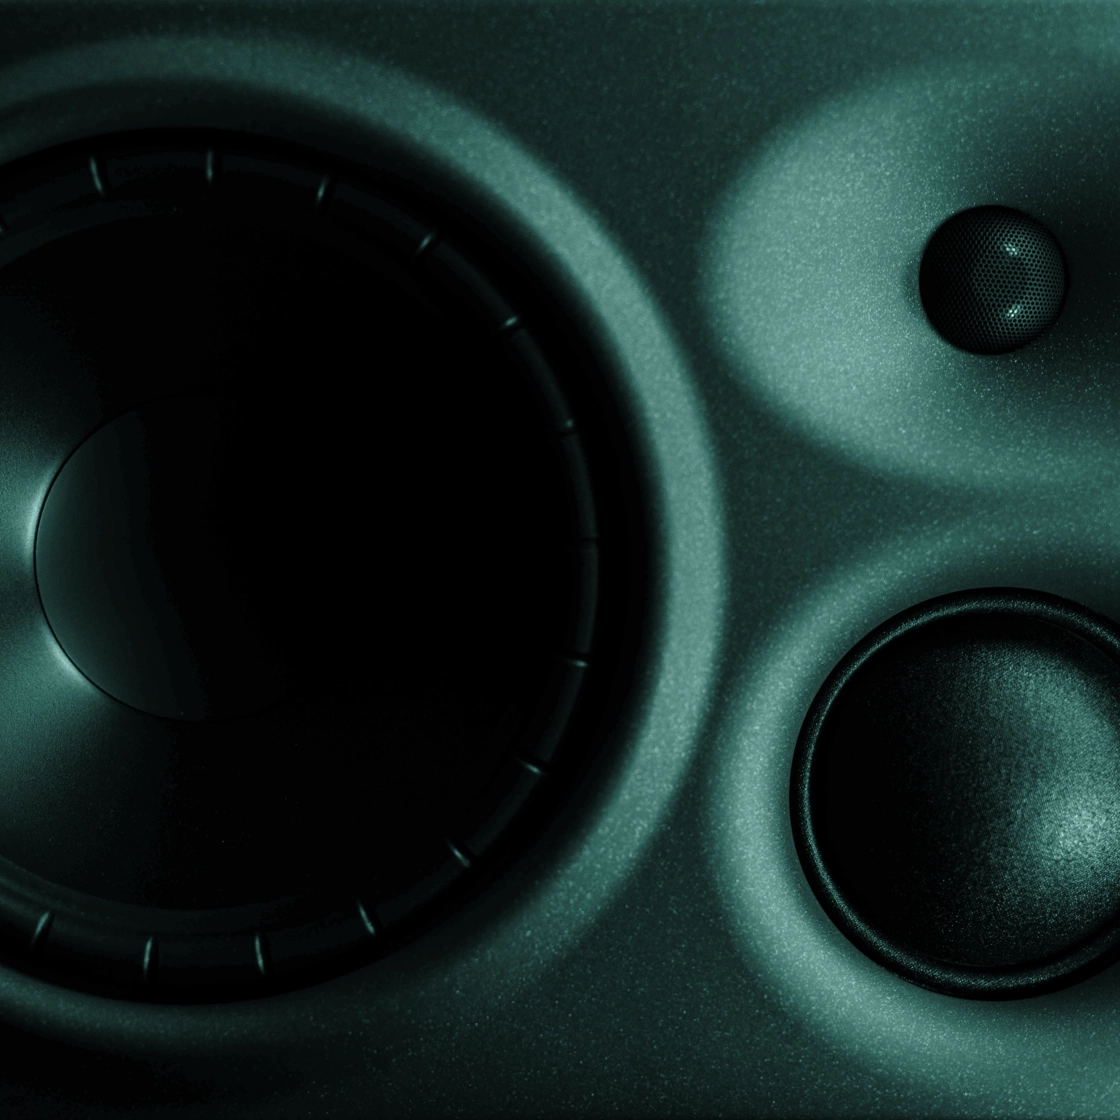 Close-up image of a speaker system featuring a large central woofer, a smaller subwoofer to the bottom right, and a small tweeter to the top right, all housed in a dark, textured casing. The lighting creates subtle reflections and shadows on the surface.